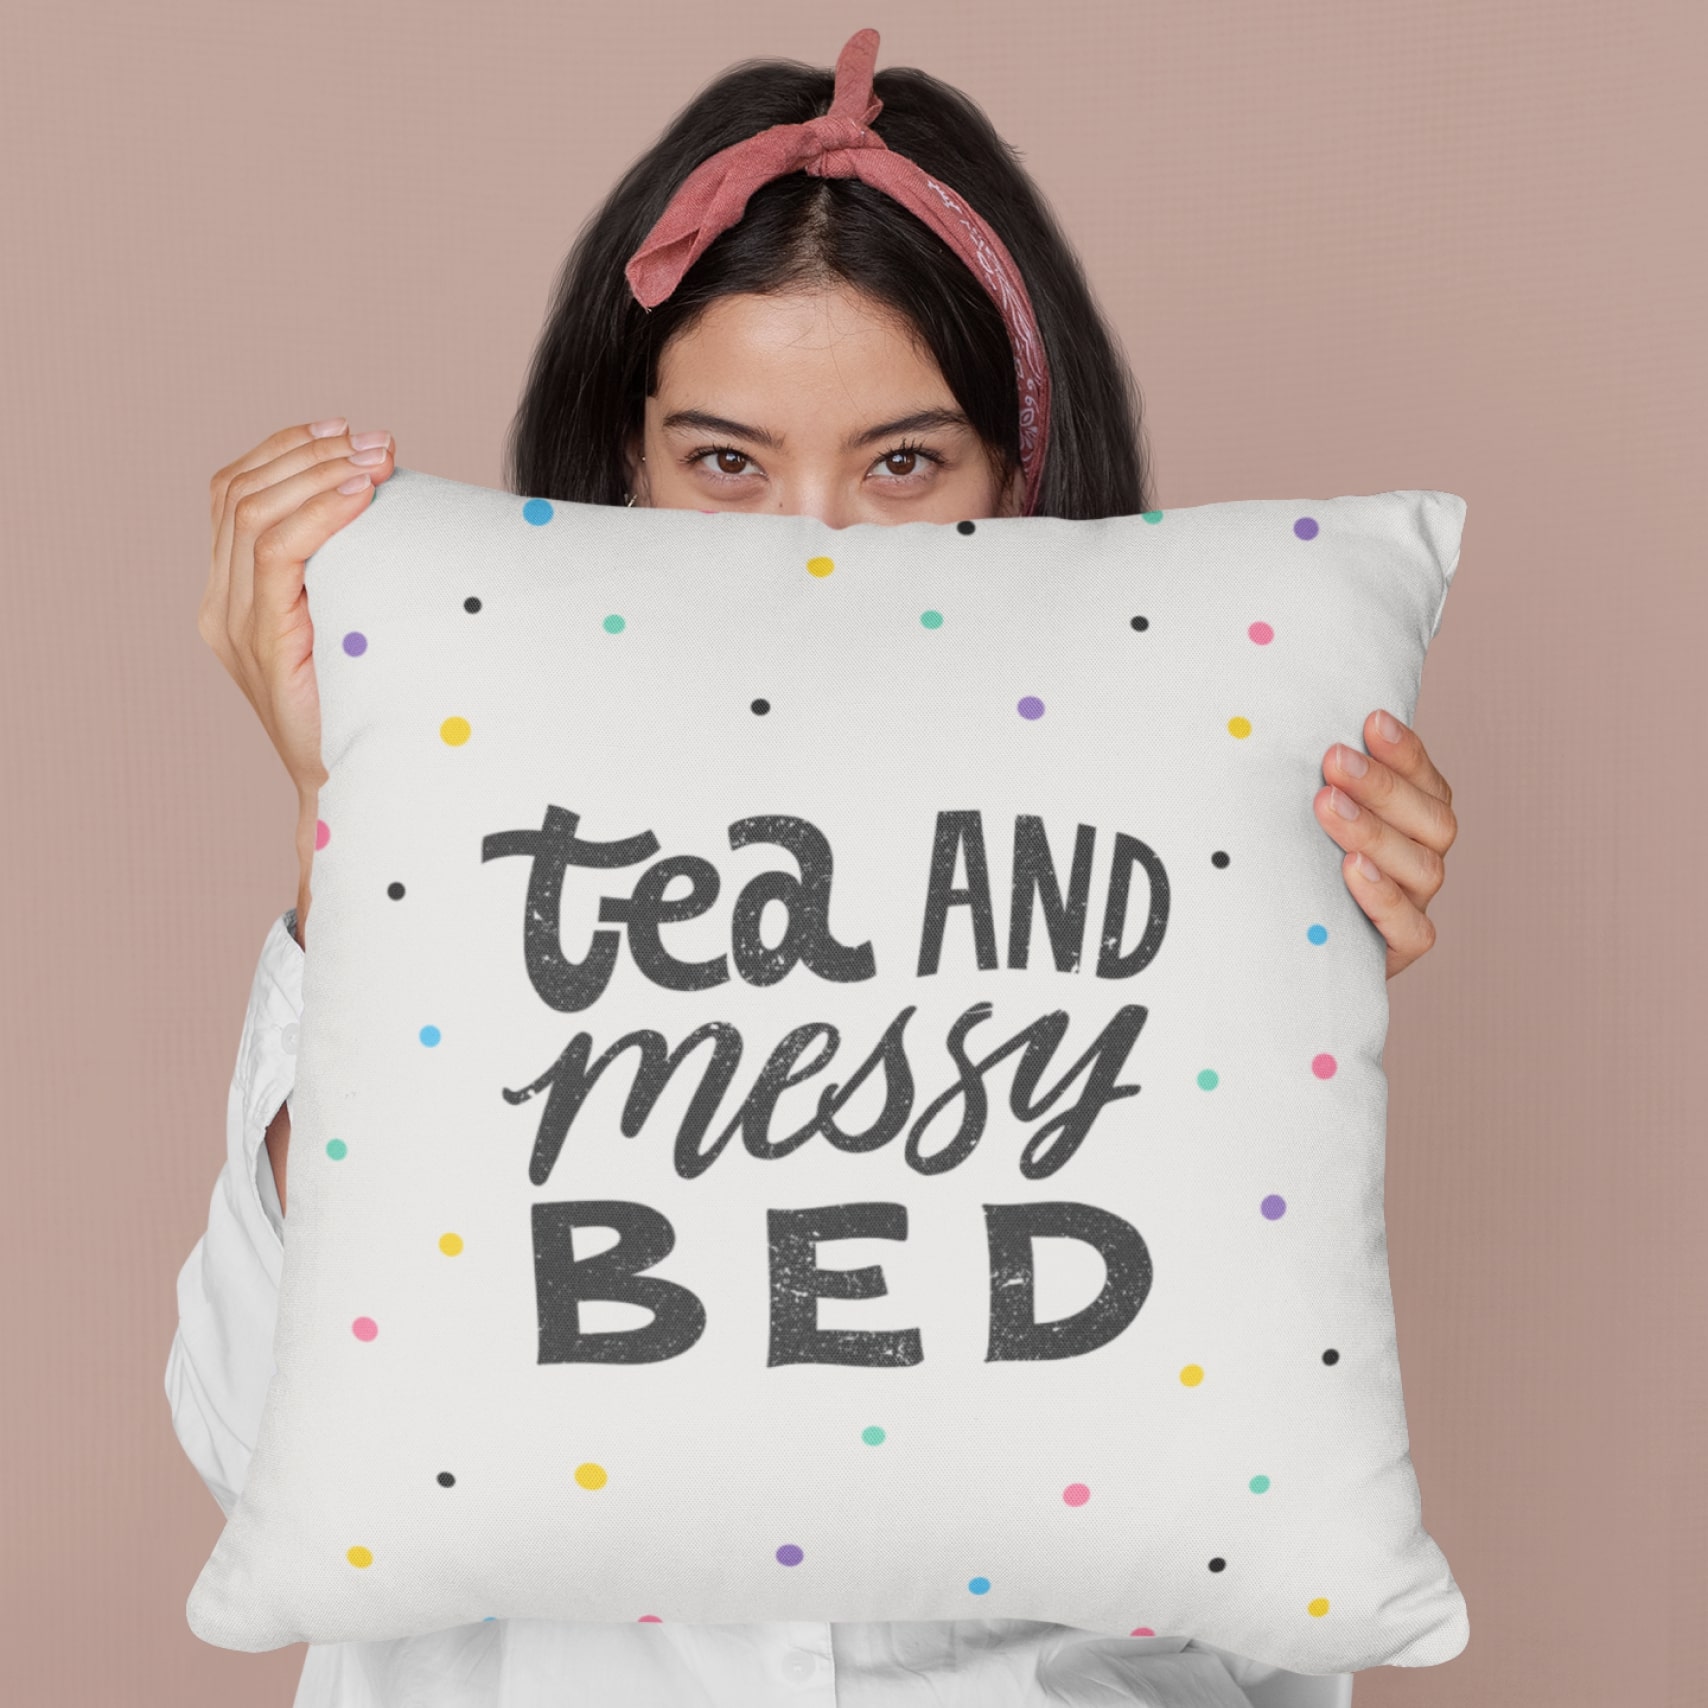 A custom cushion with “Tea and Messy Bed” text printed on.